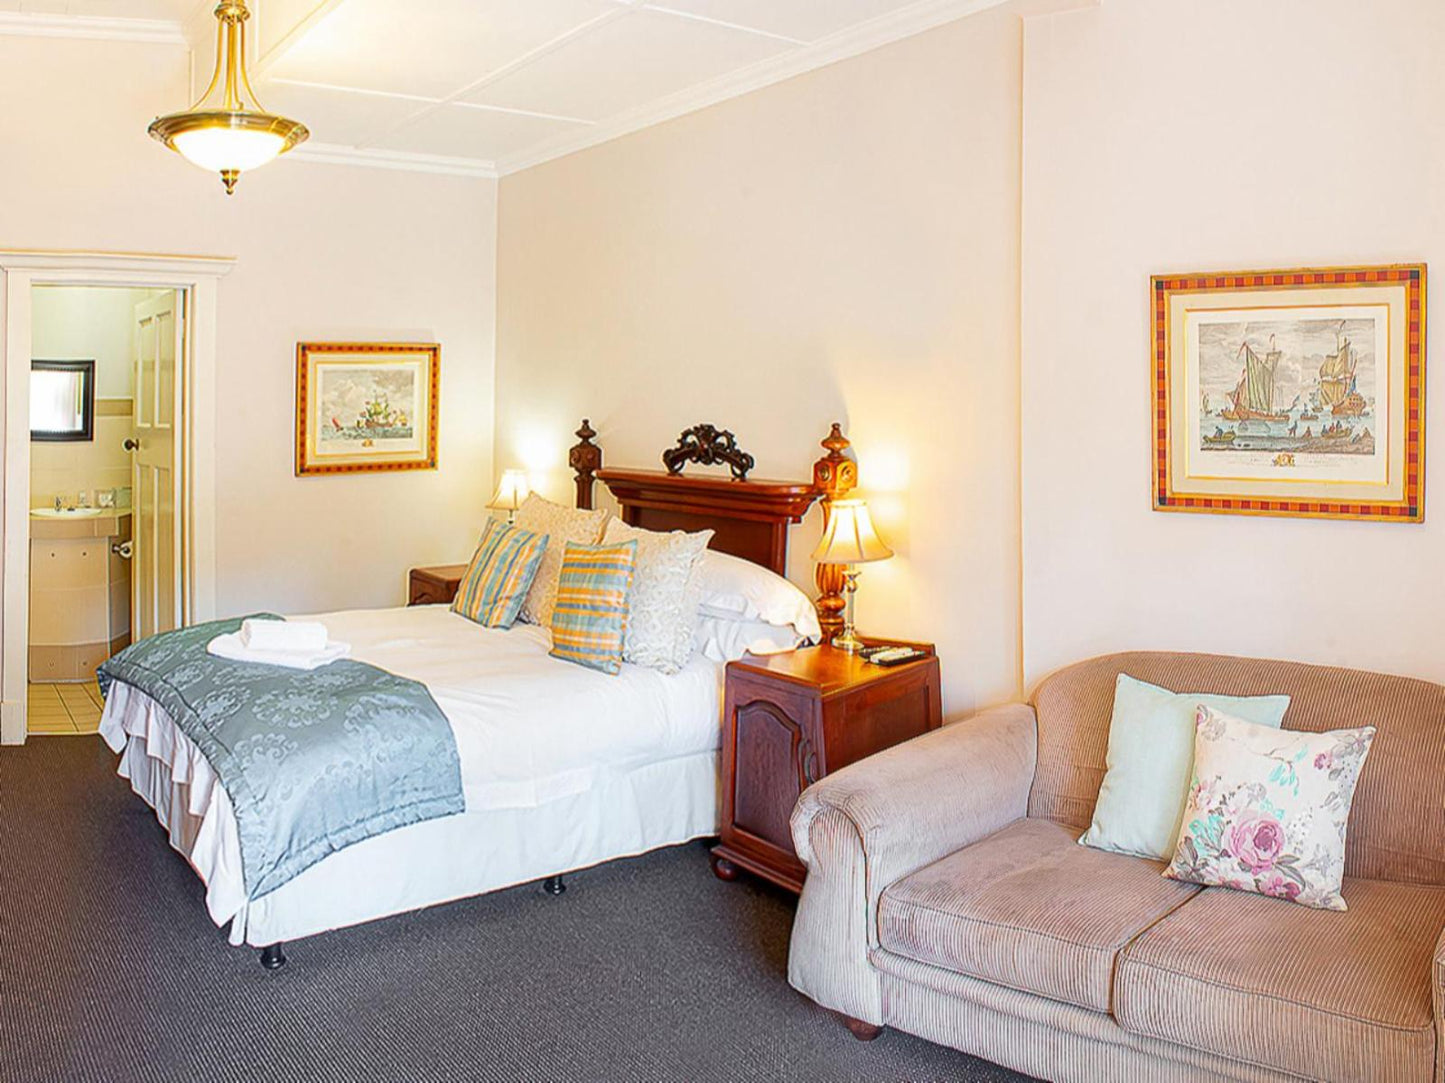 Double Room @ Roseland House